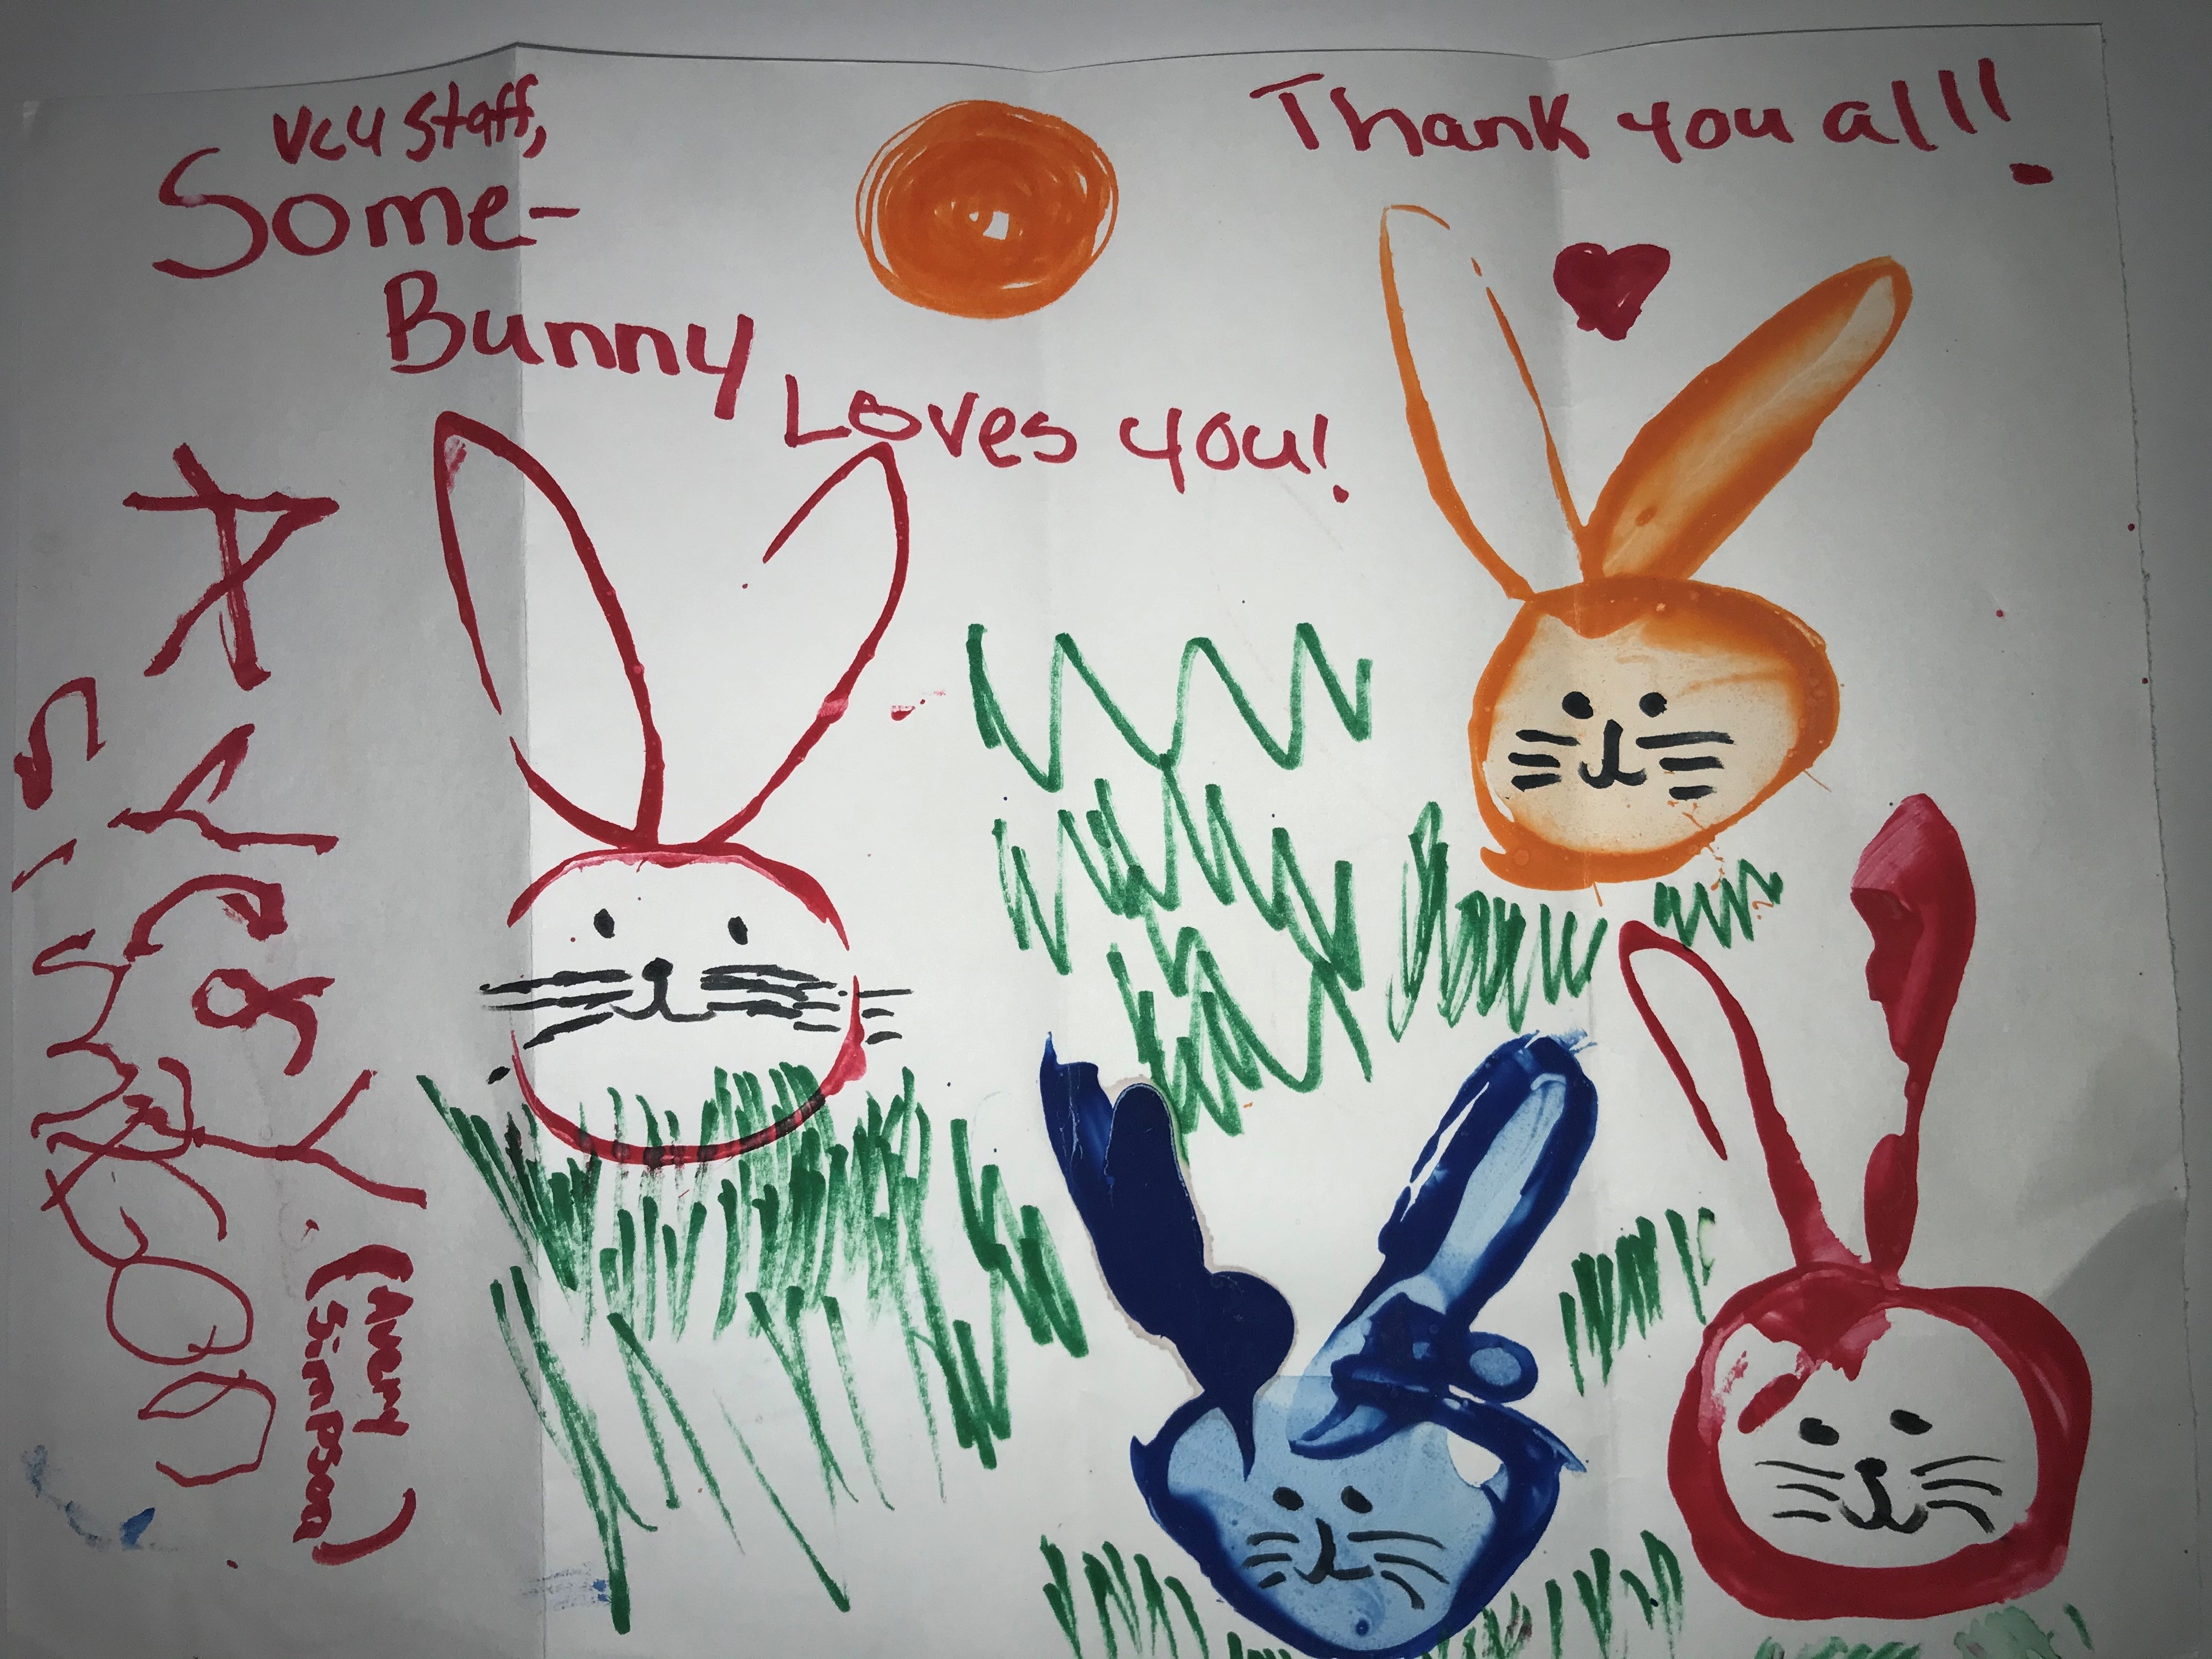 Some-bunny loves you. Thank you all!